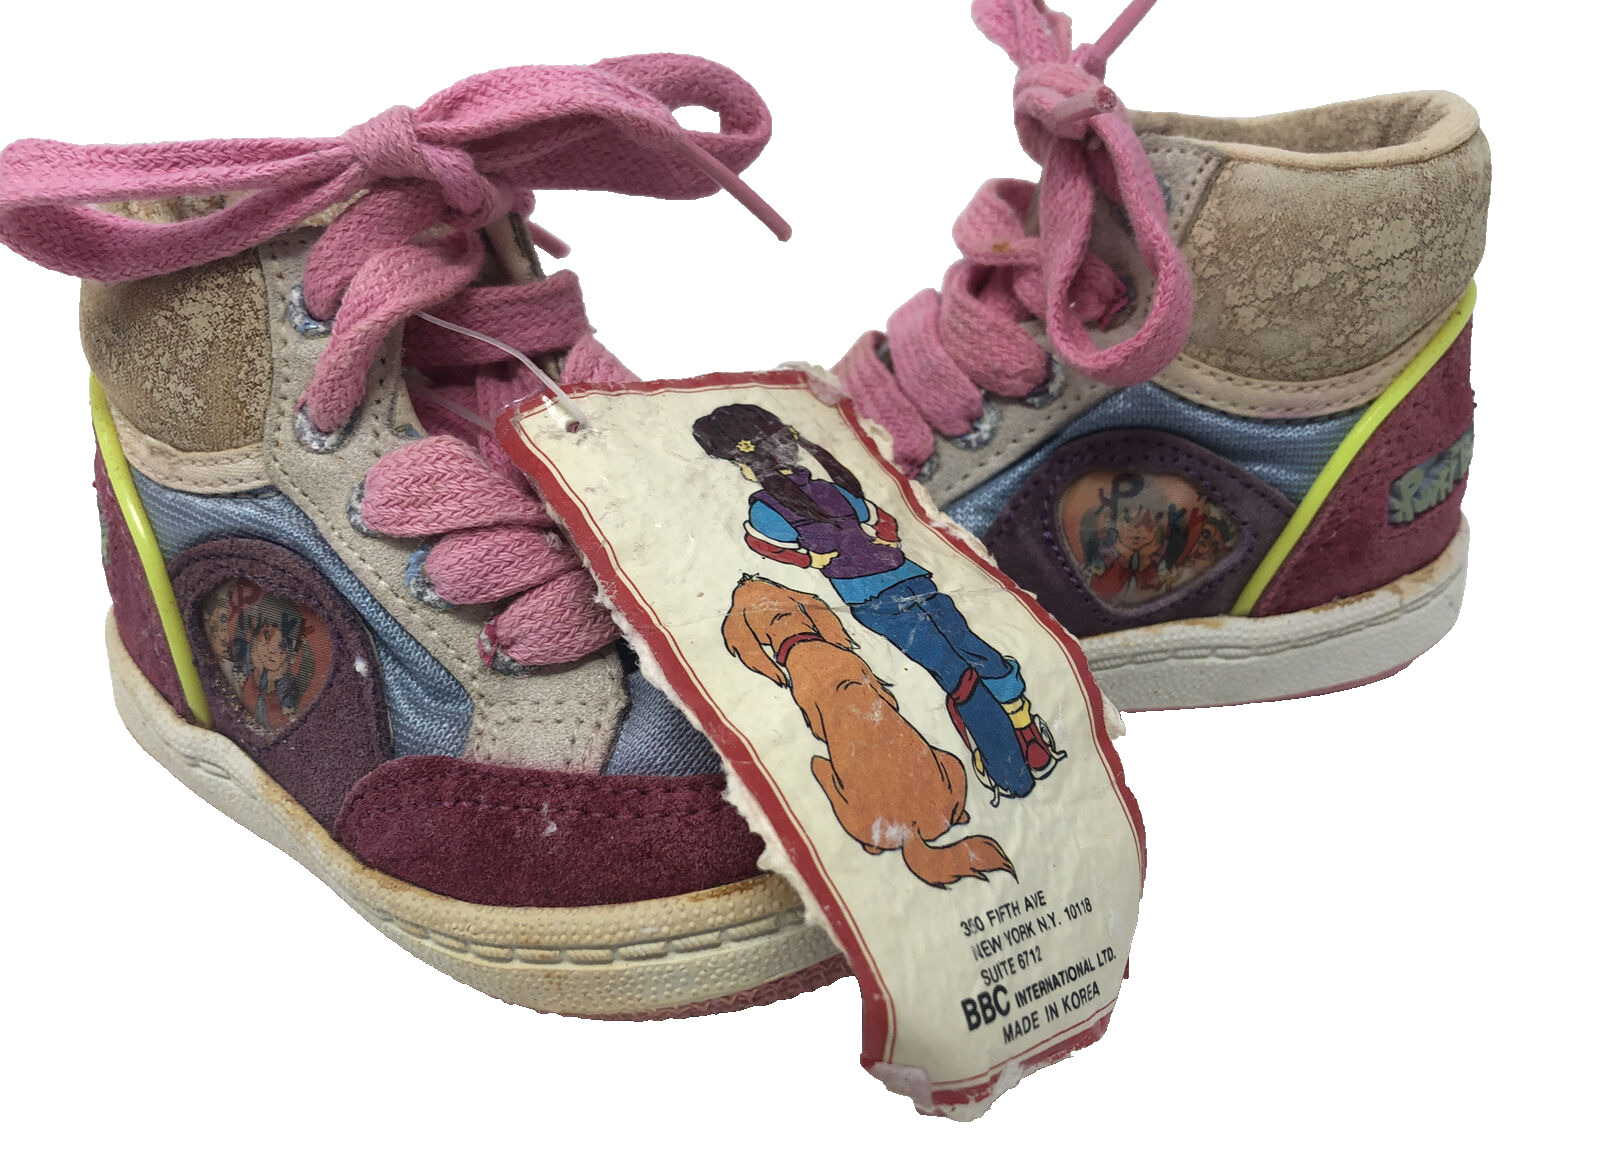 Vintage Punky Brewster Punky Power Toddler Shoes size 5 High Top Korea